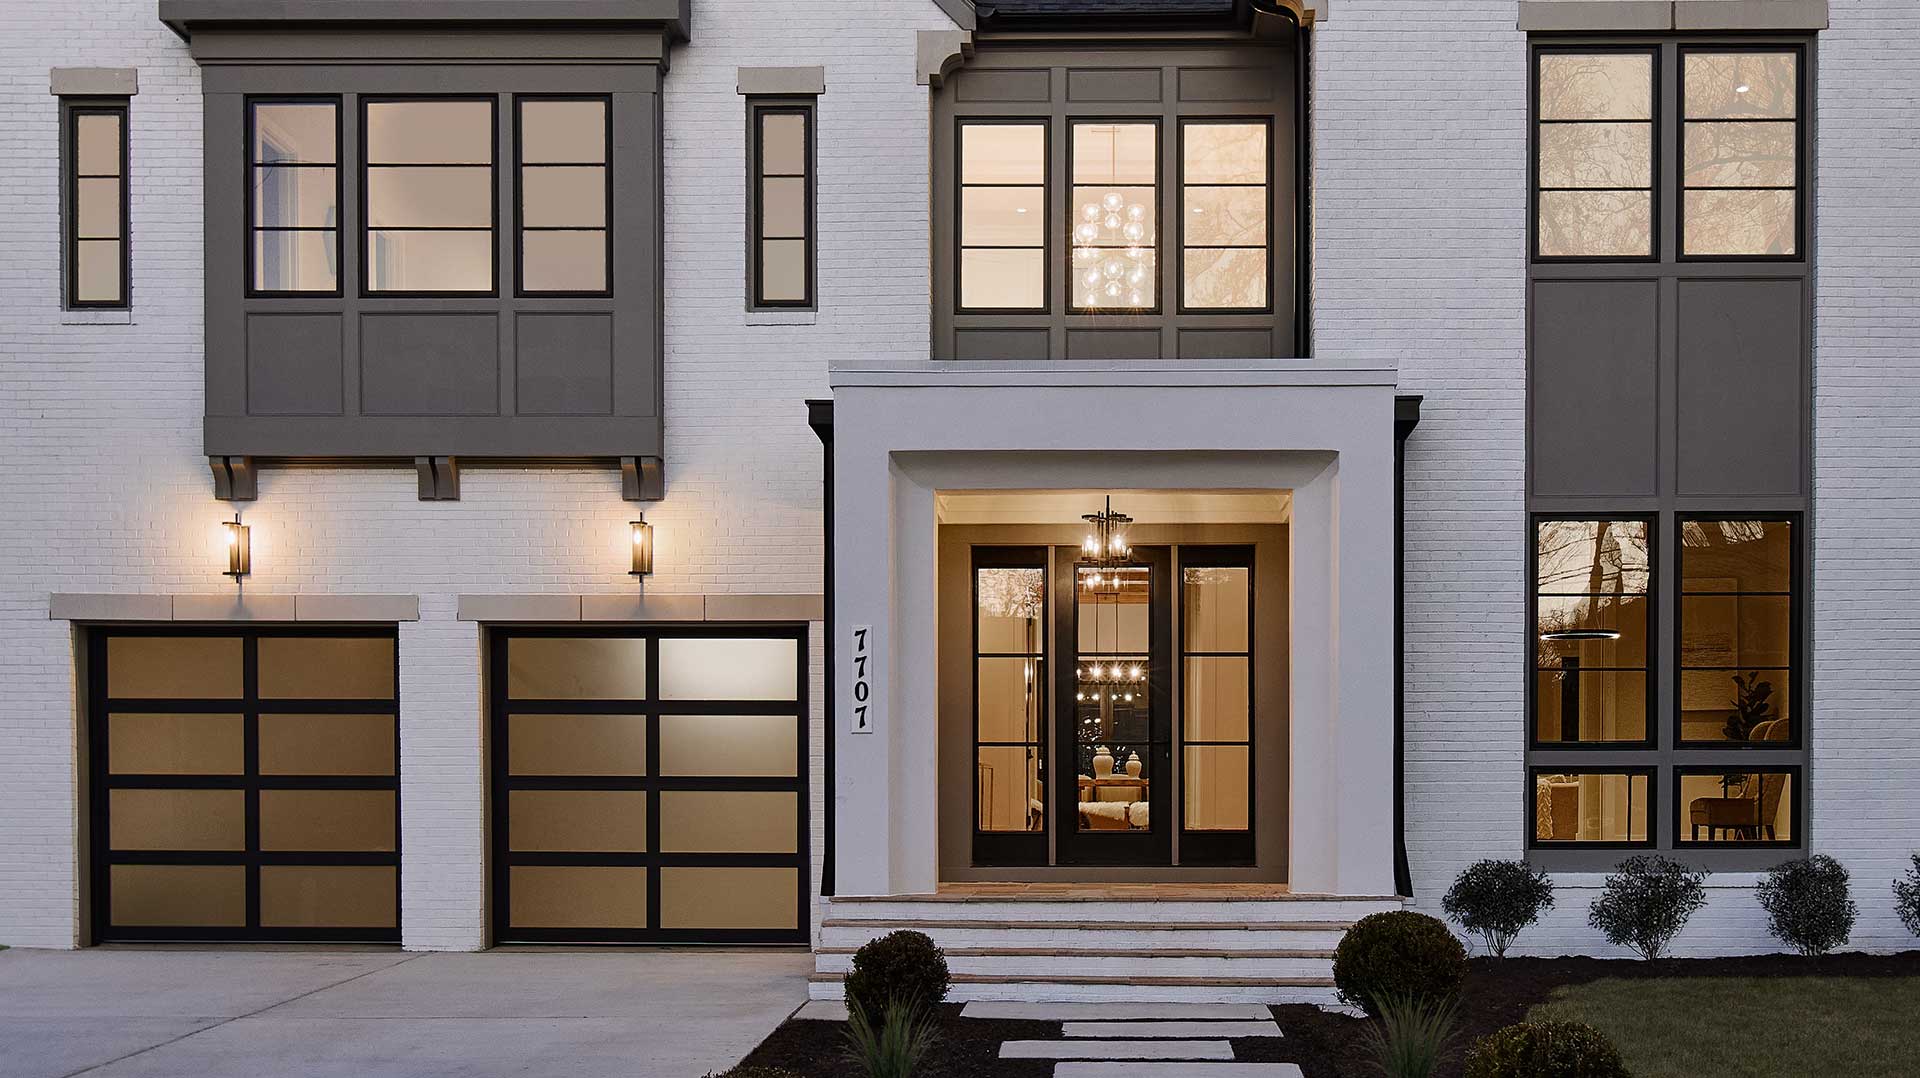 A close up of the front exterior of a home with patterned panel and window assemblies, white painted brick, aluminum garage door with smoked glass and custom details.